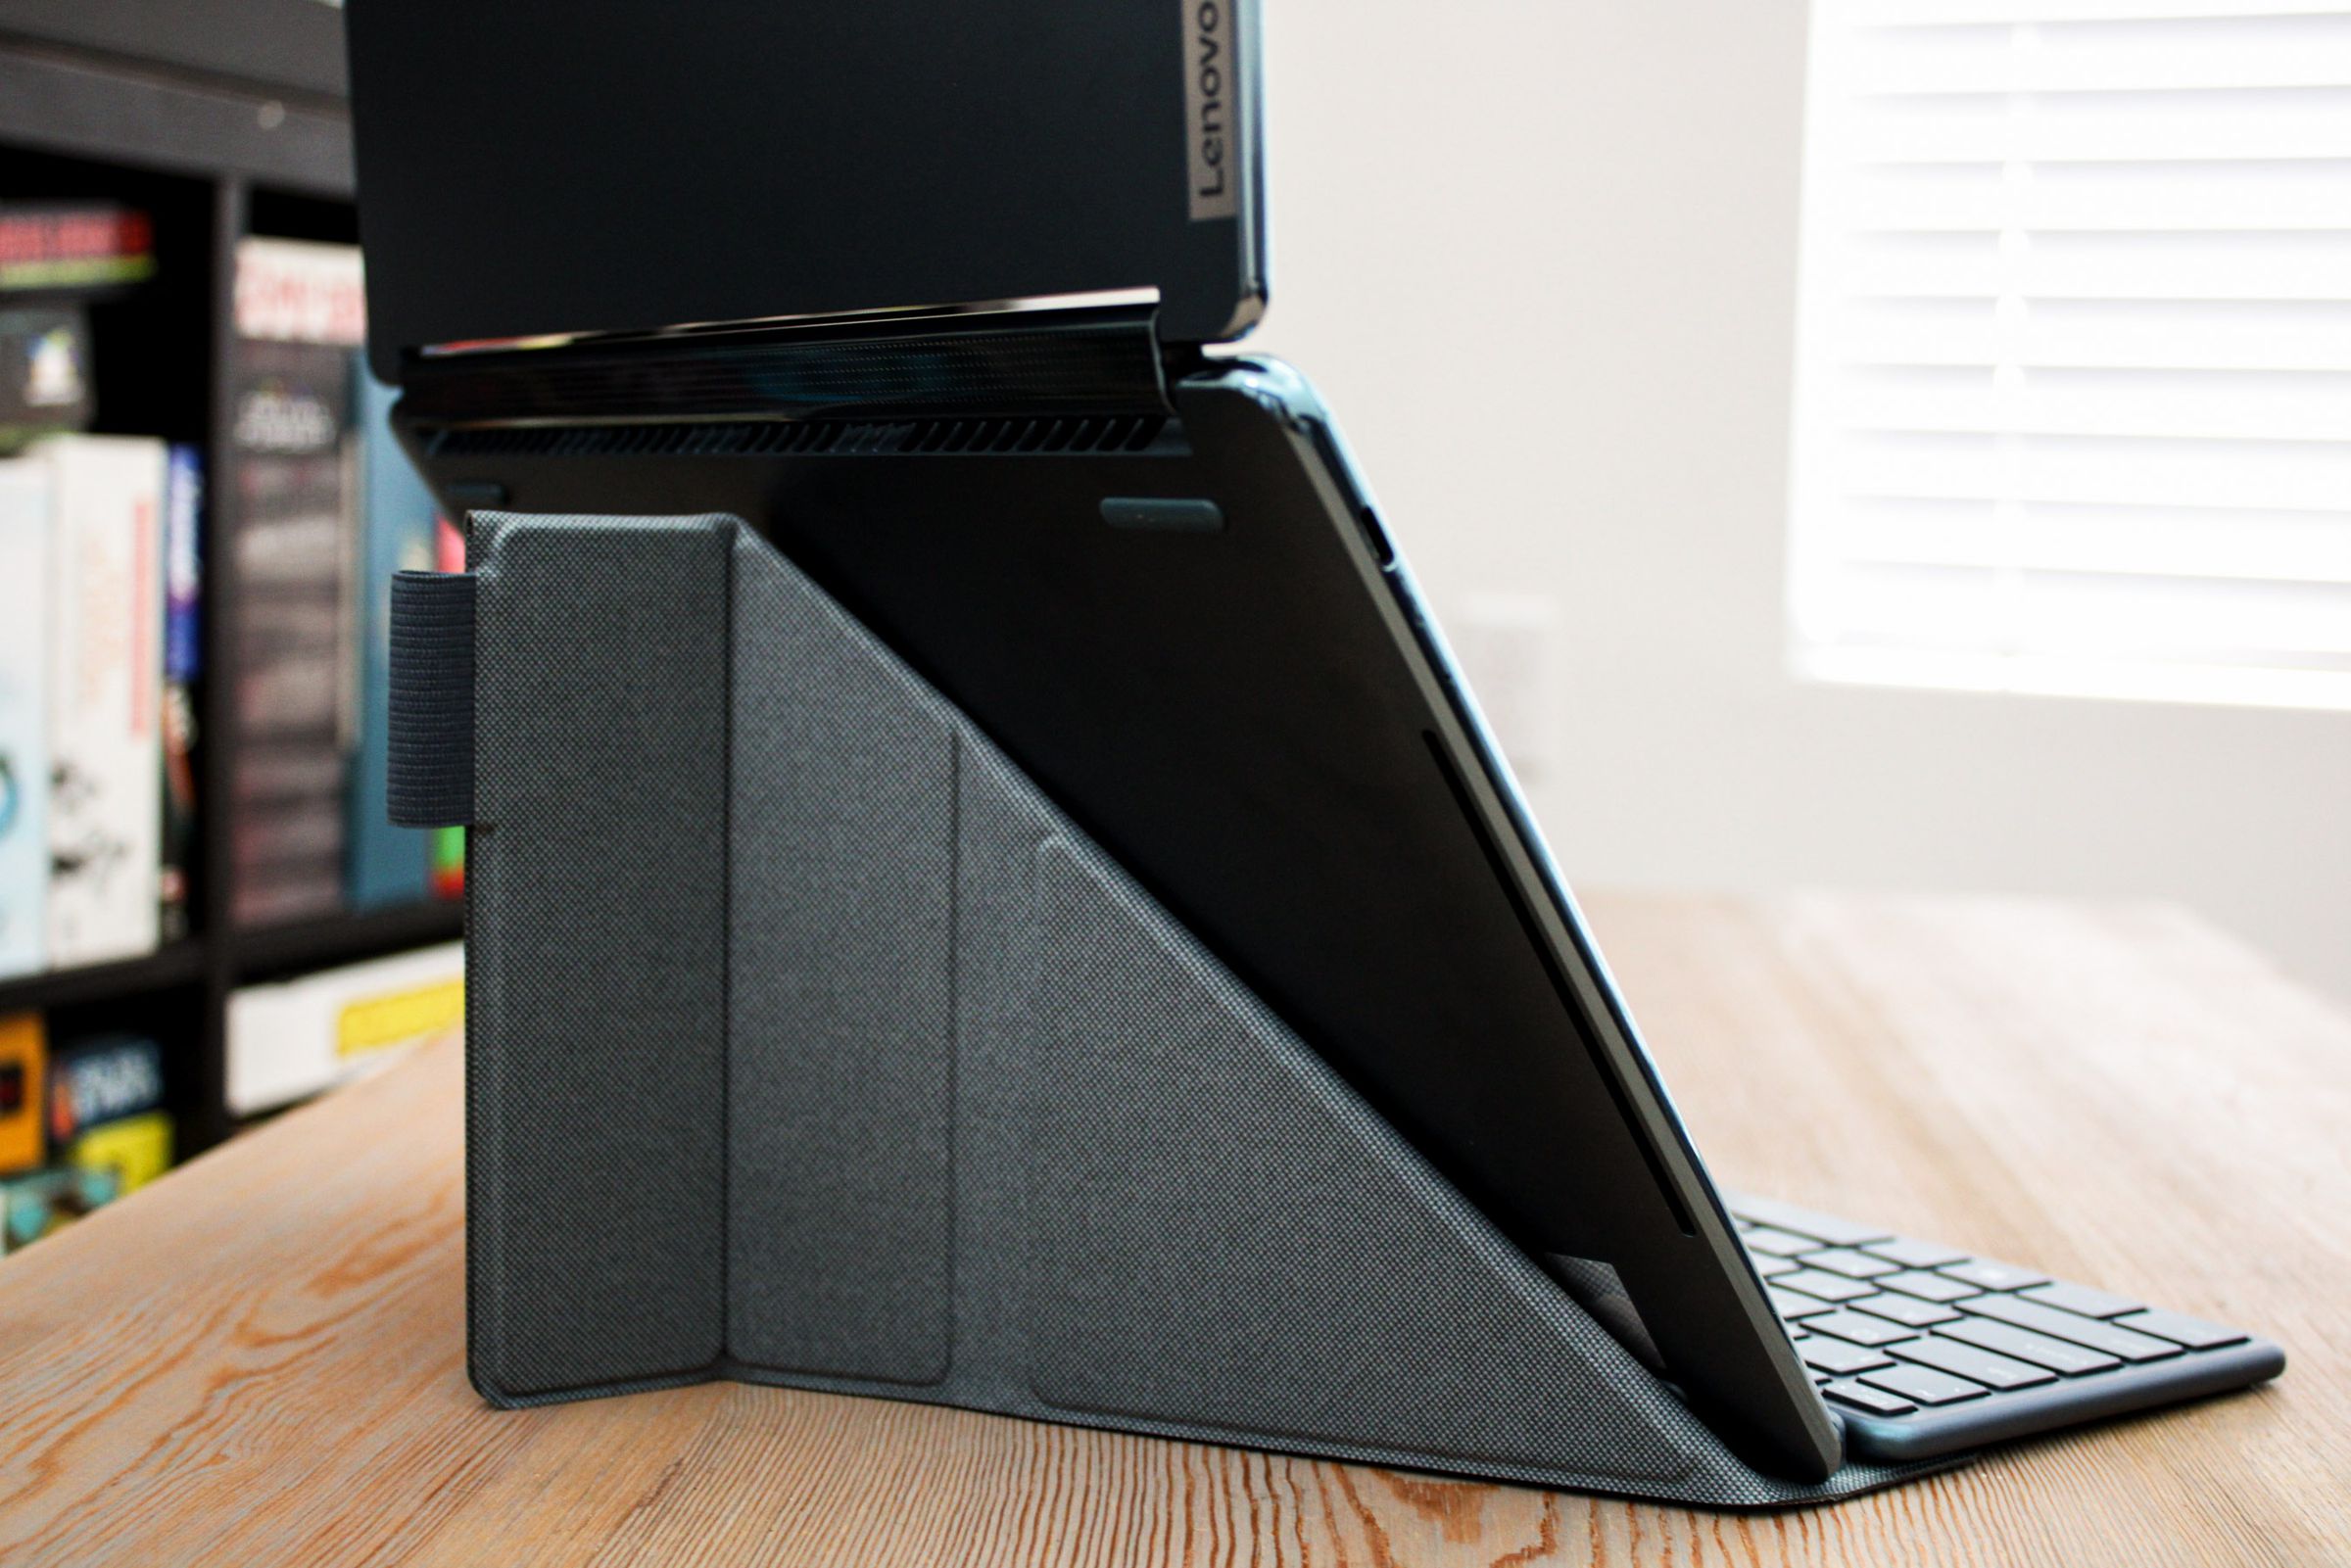 The back of a laptop propped up by a stand.